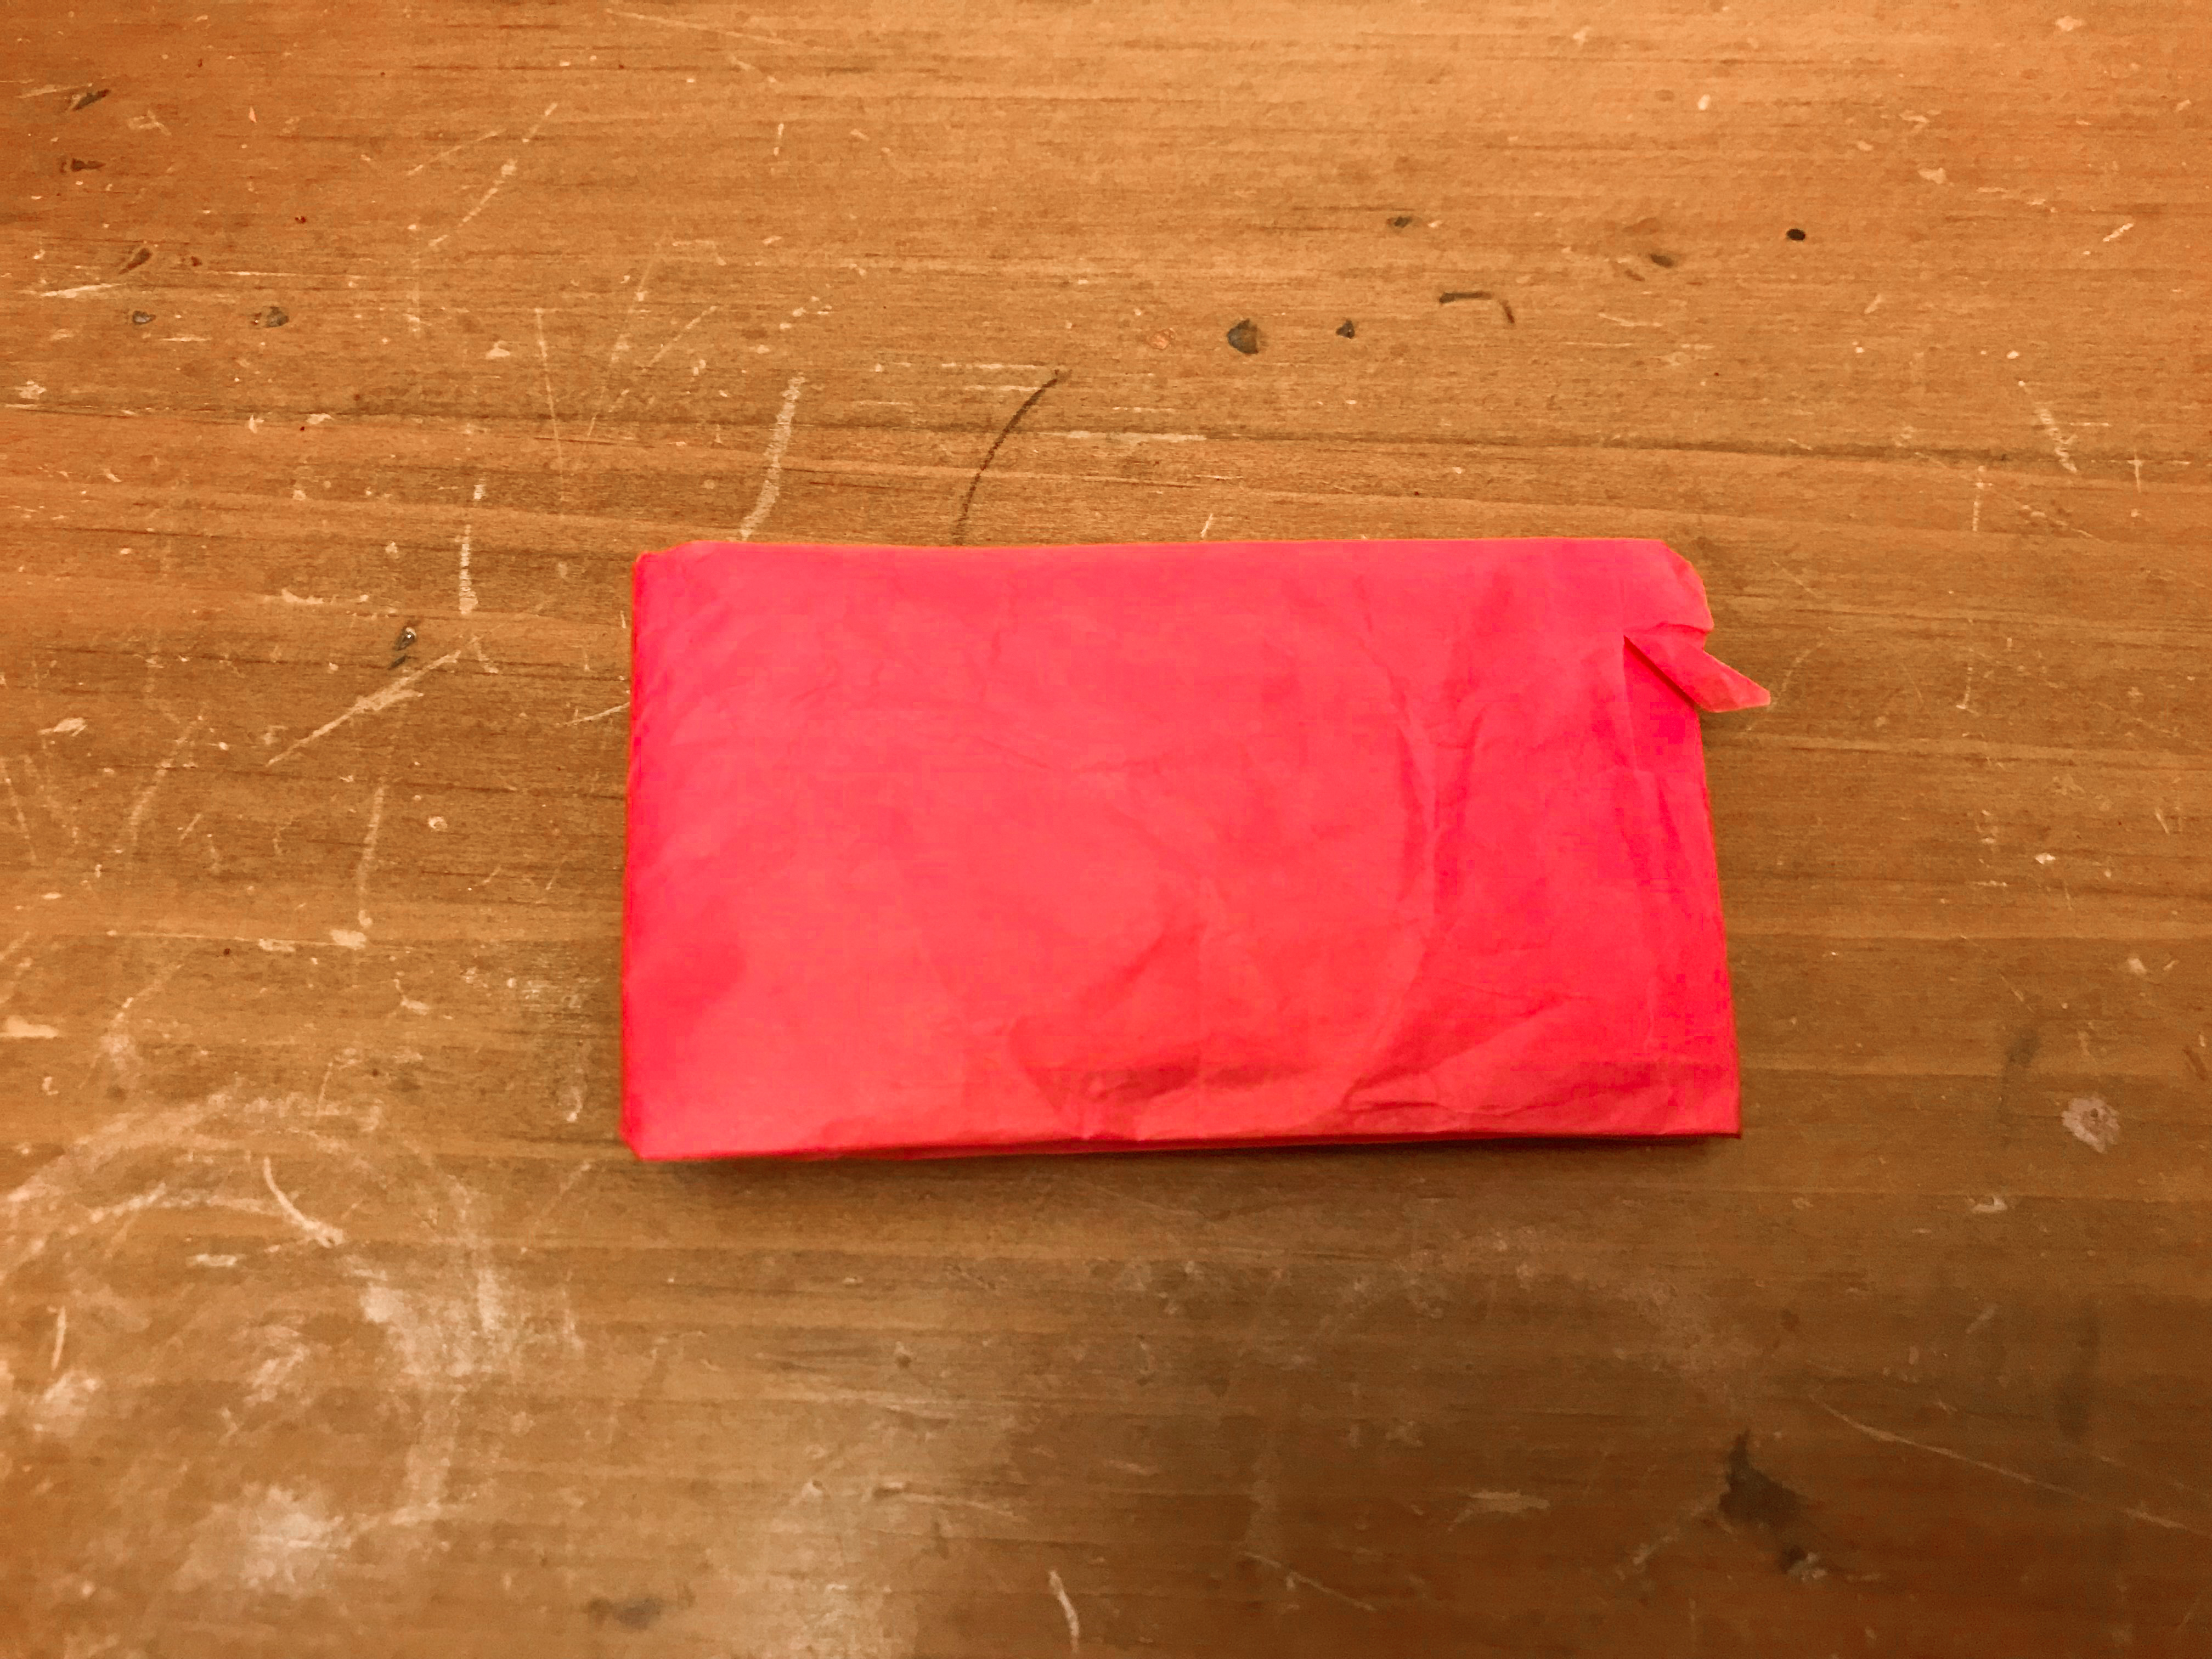 Folded pink tissue paper on wood background